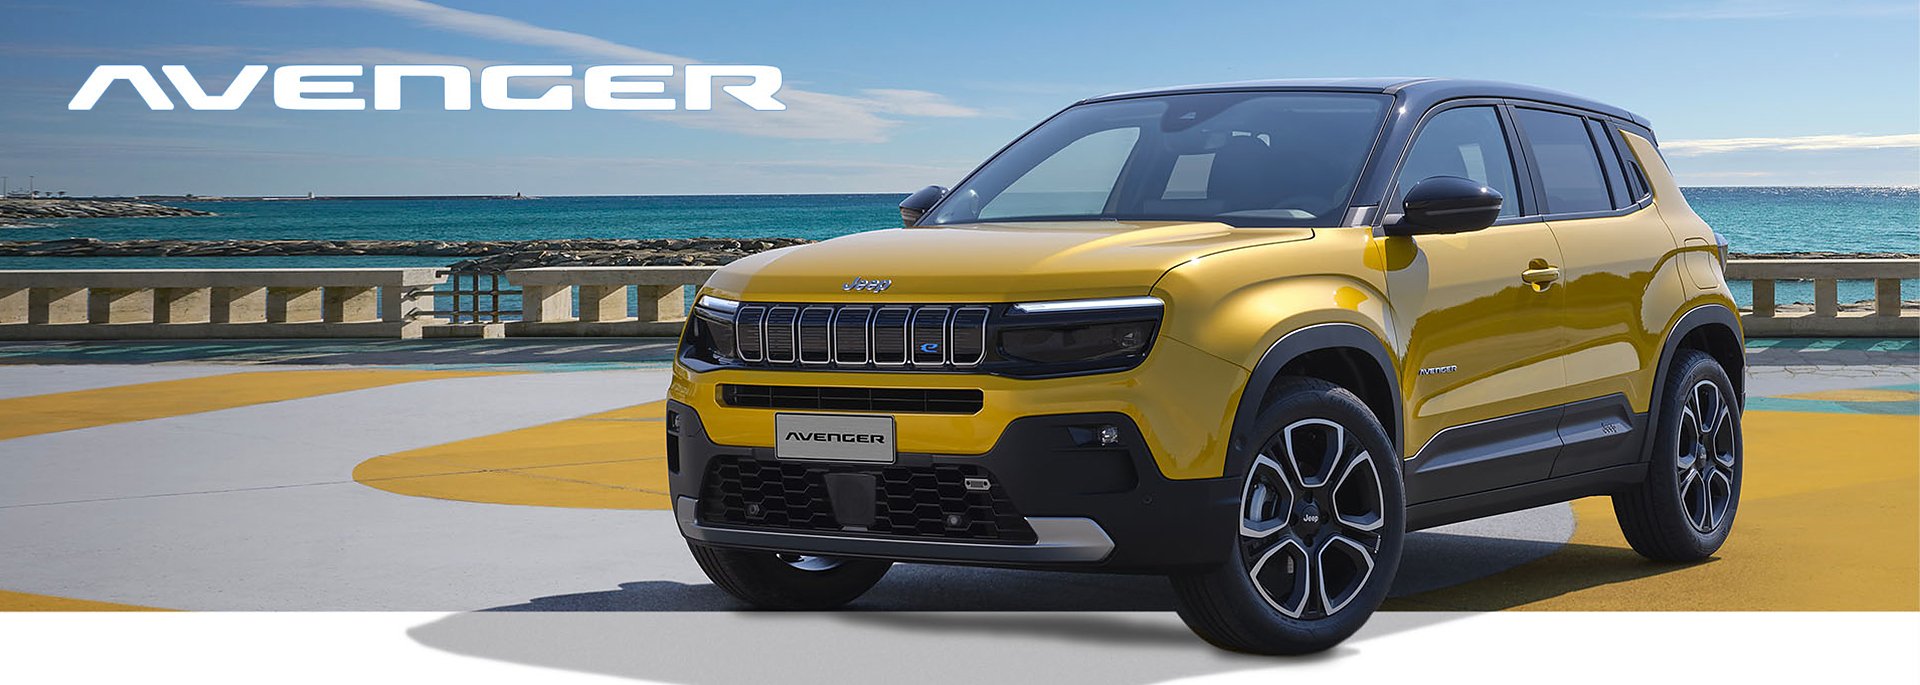 BE THE FIRST - Der neue Jeep® Avenger!